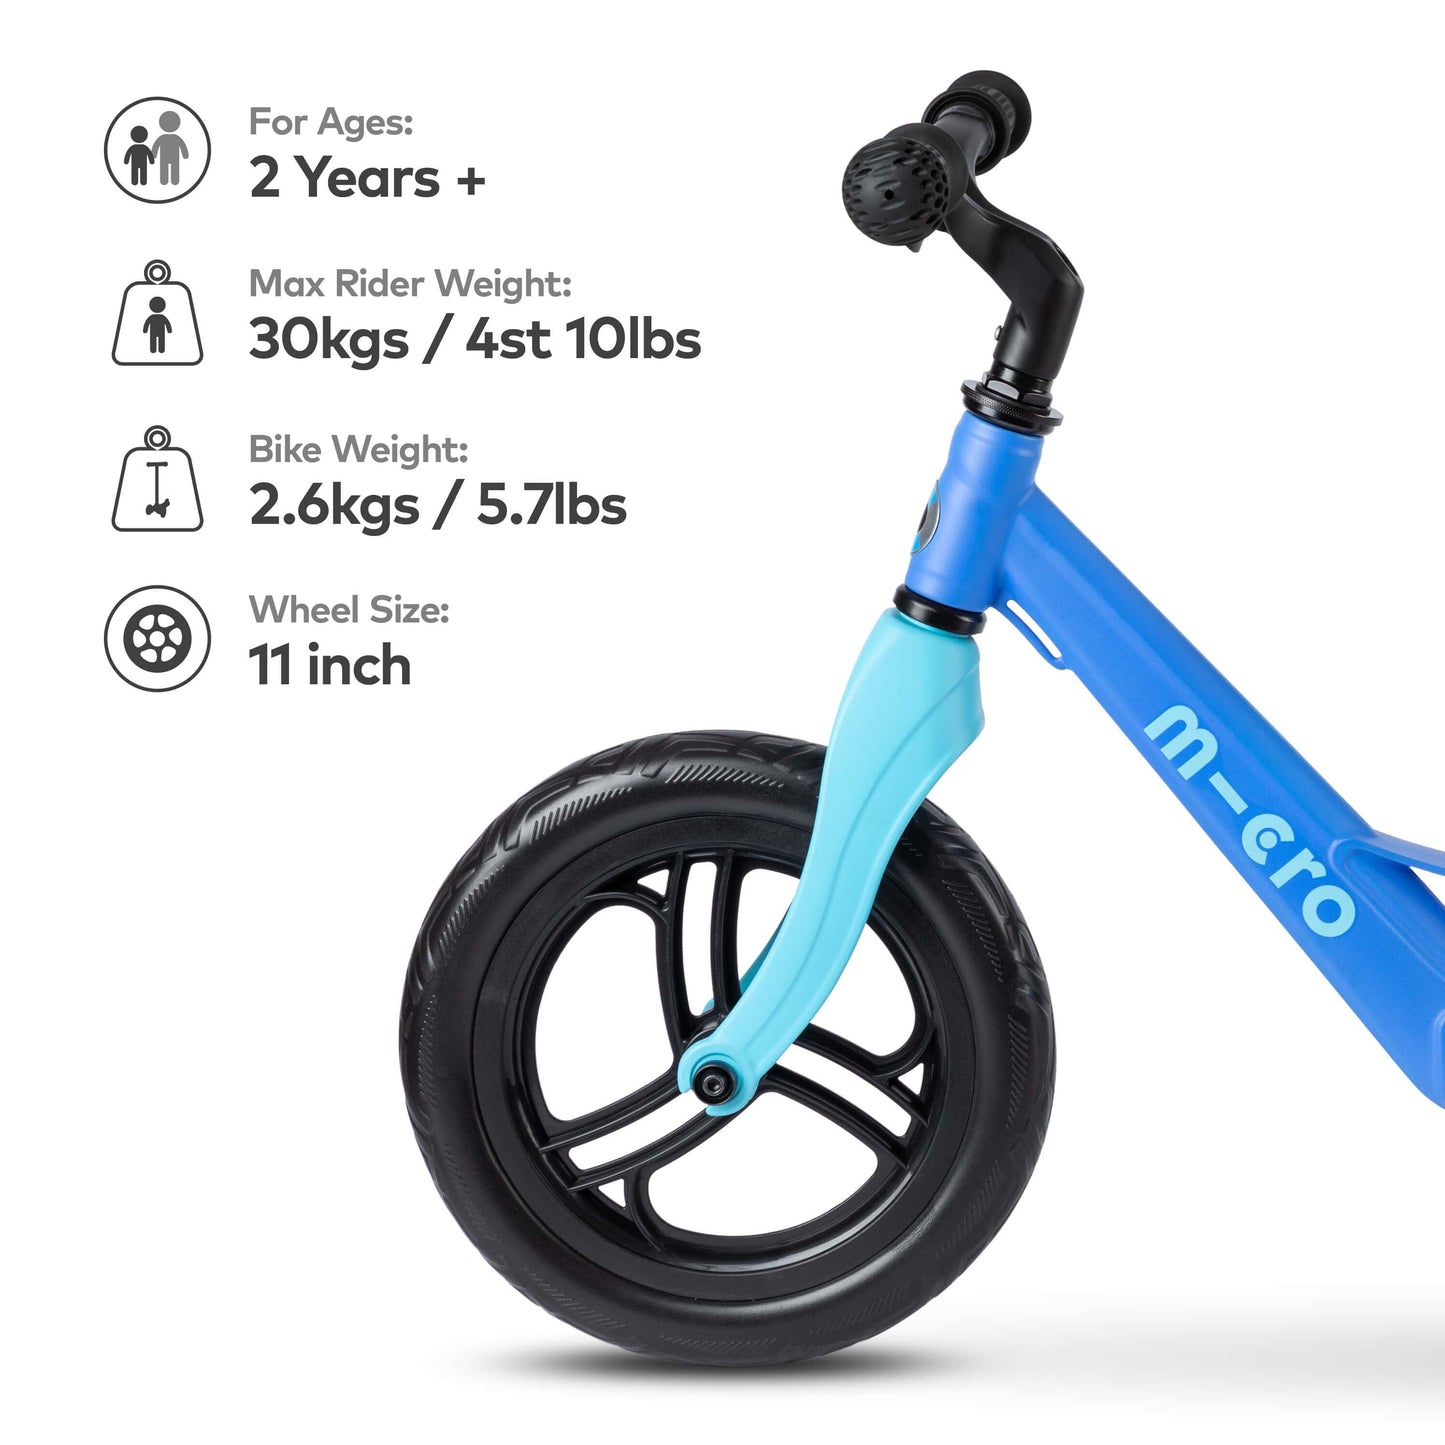 Micro Scooter Balance Bike Lite Blue size and weight guide